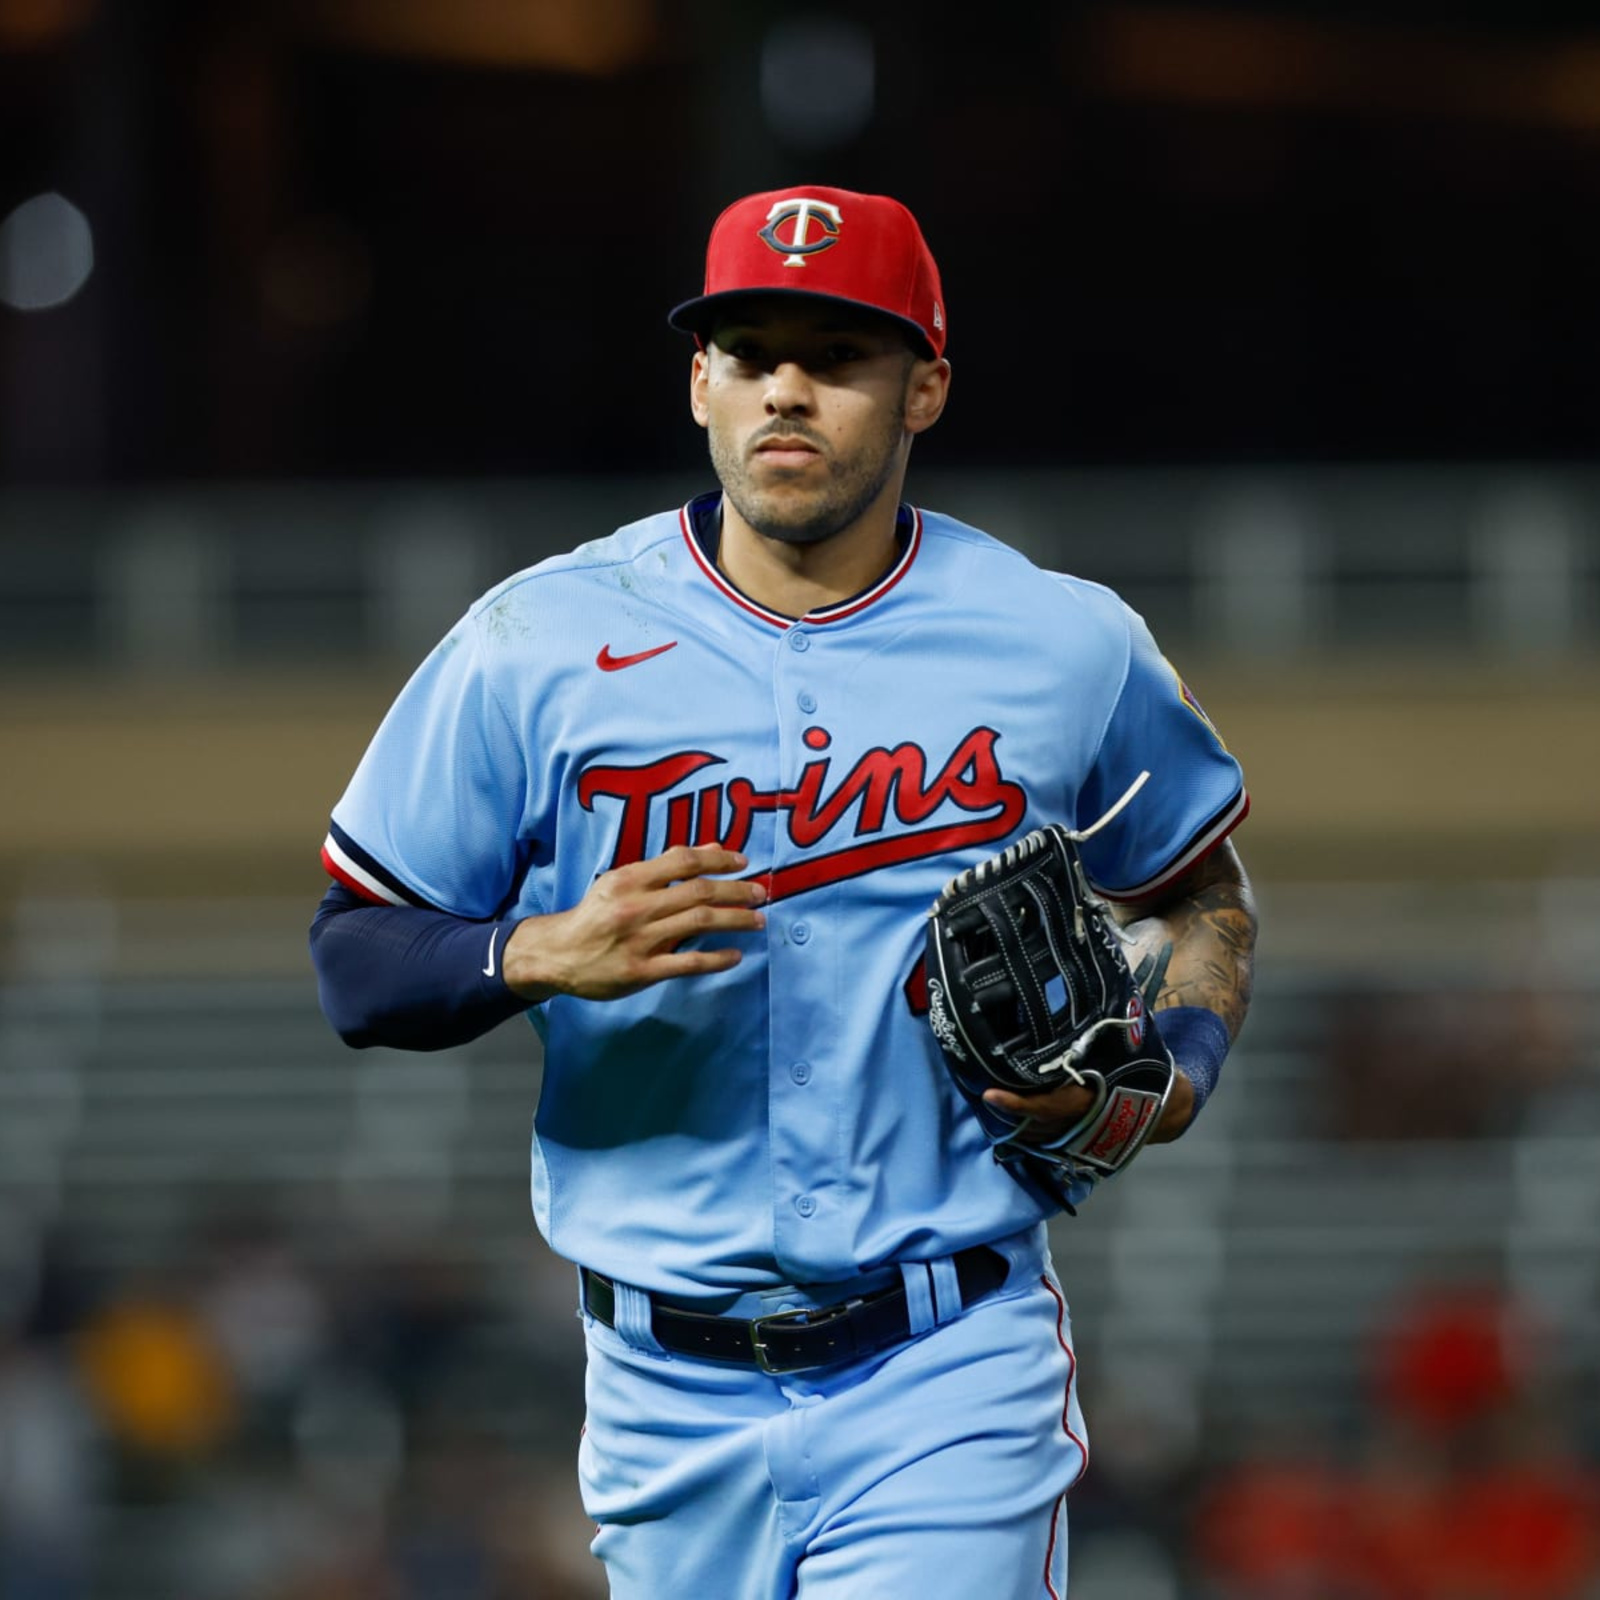 Report: Carlos Correa, Twins Agree to $200M Contract After Failed